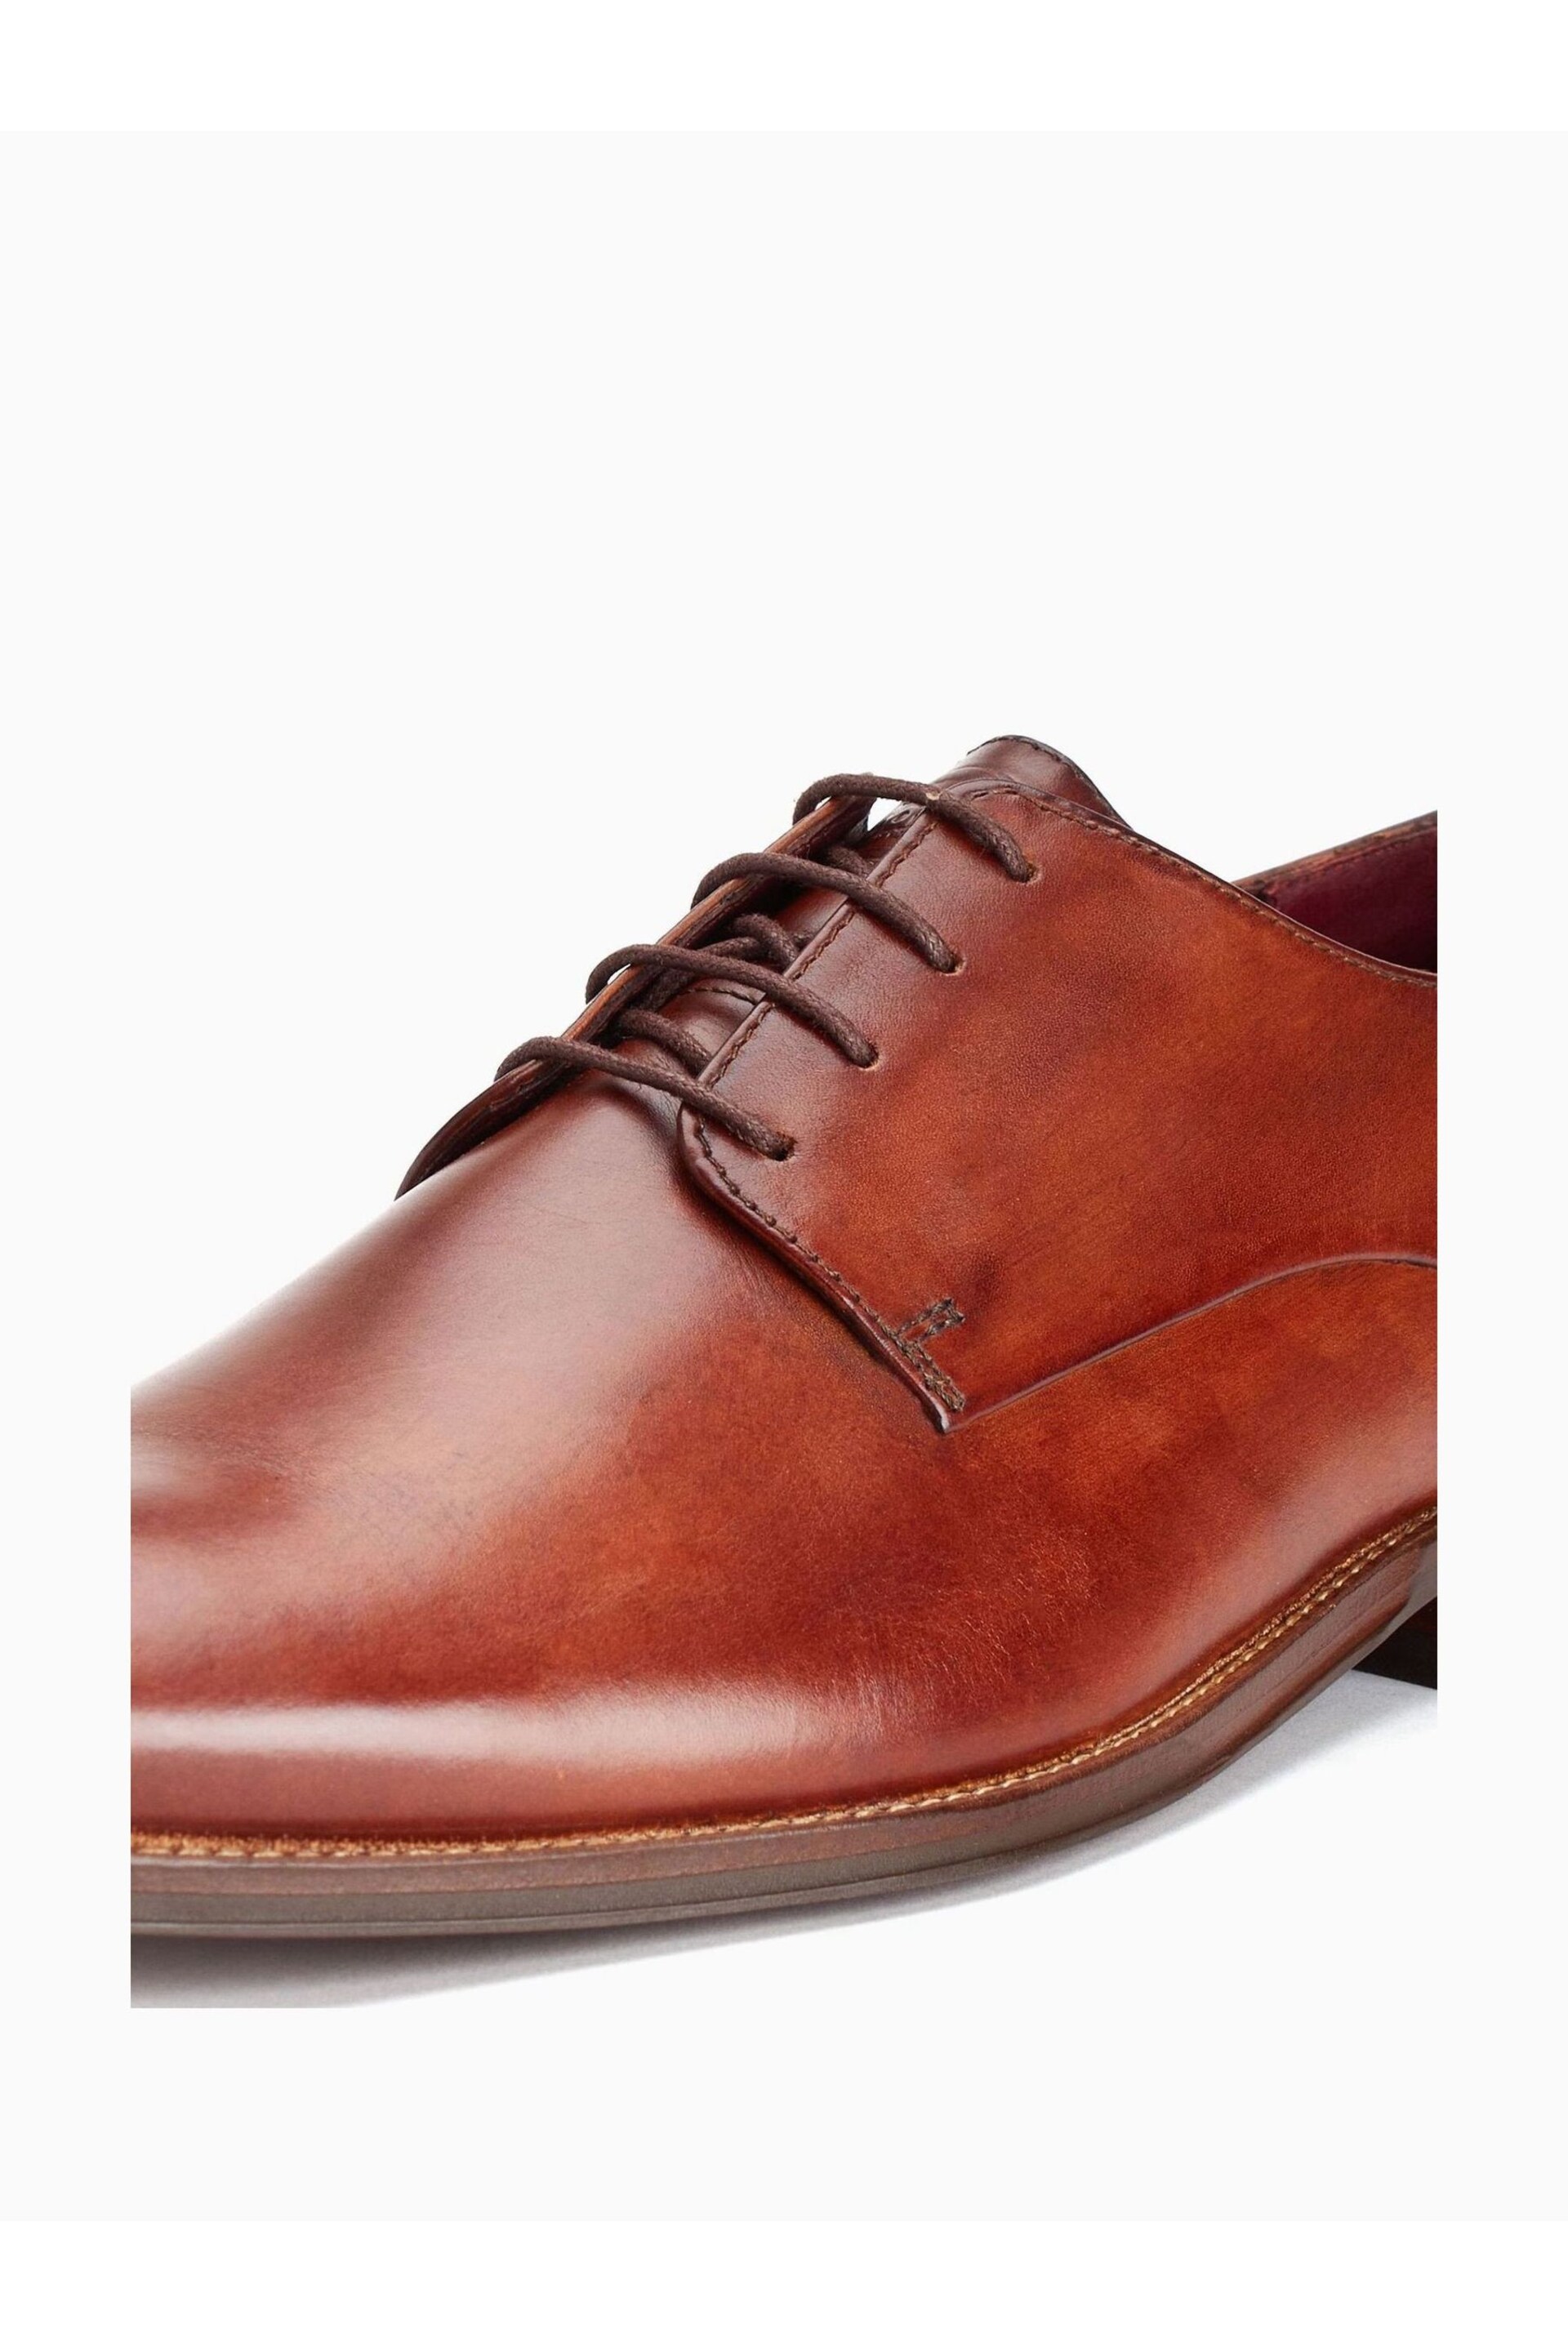 Base London Marley Derby Shoes - Image 6 of 6